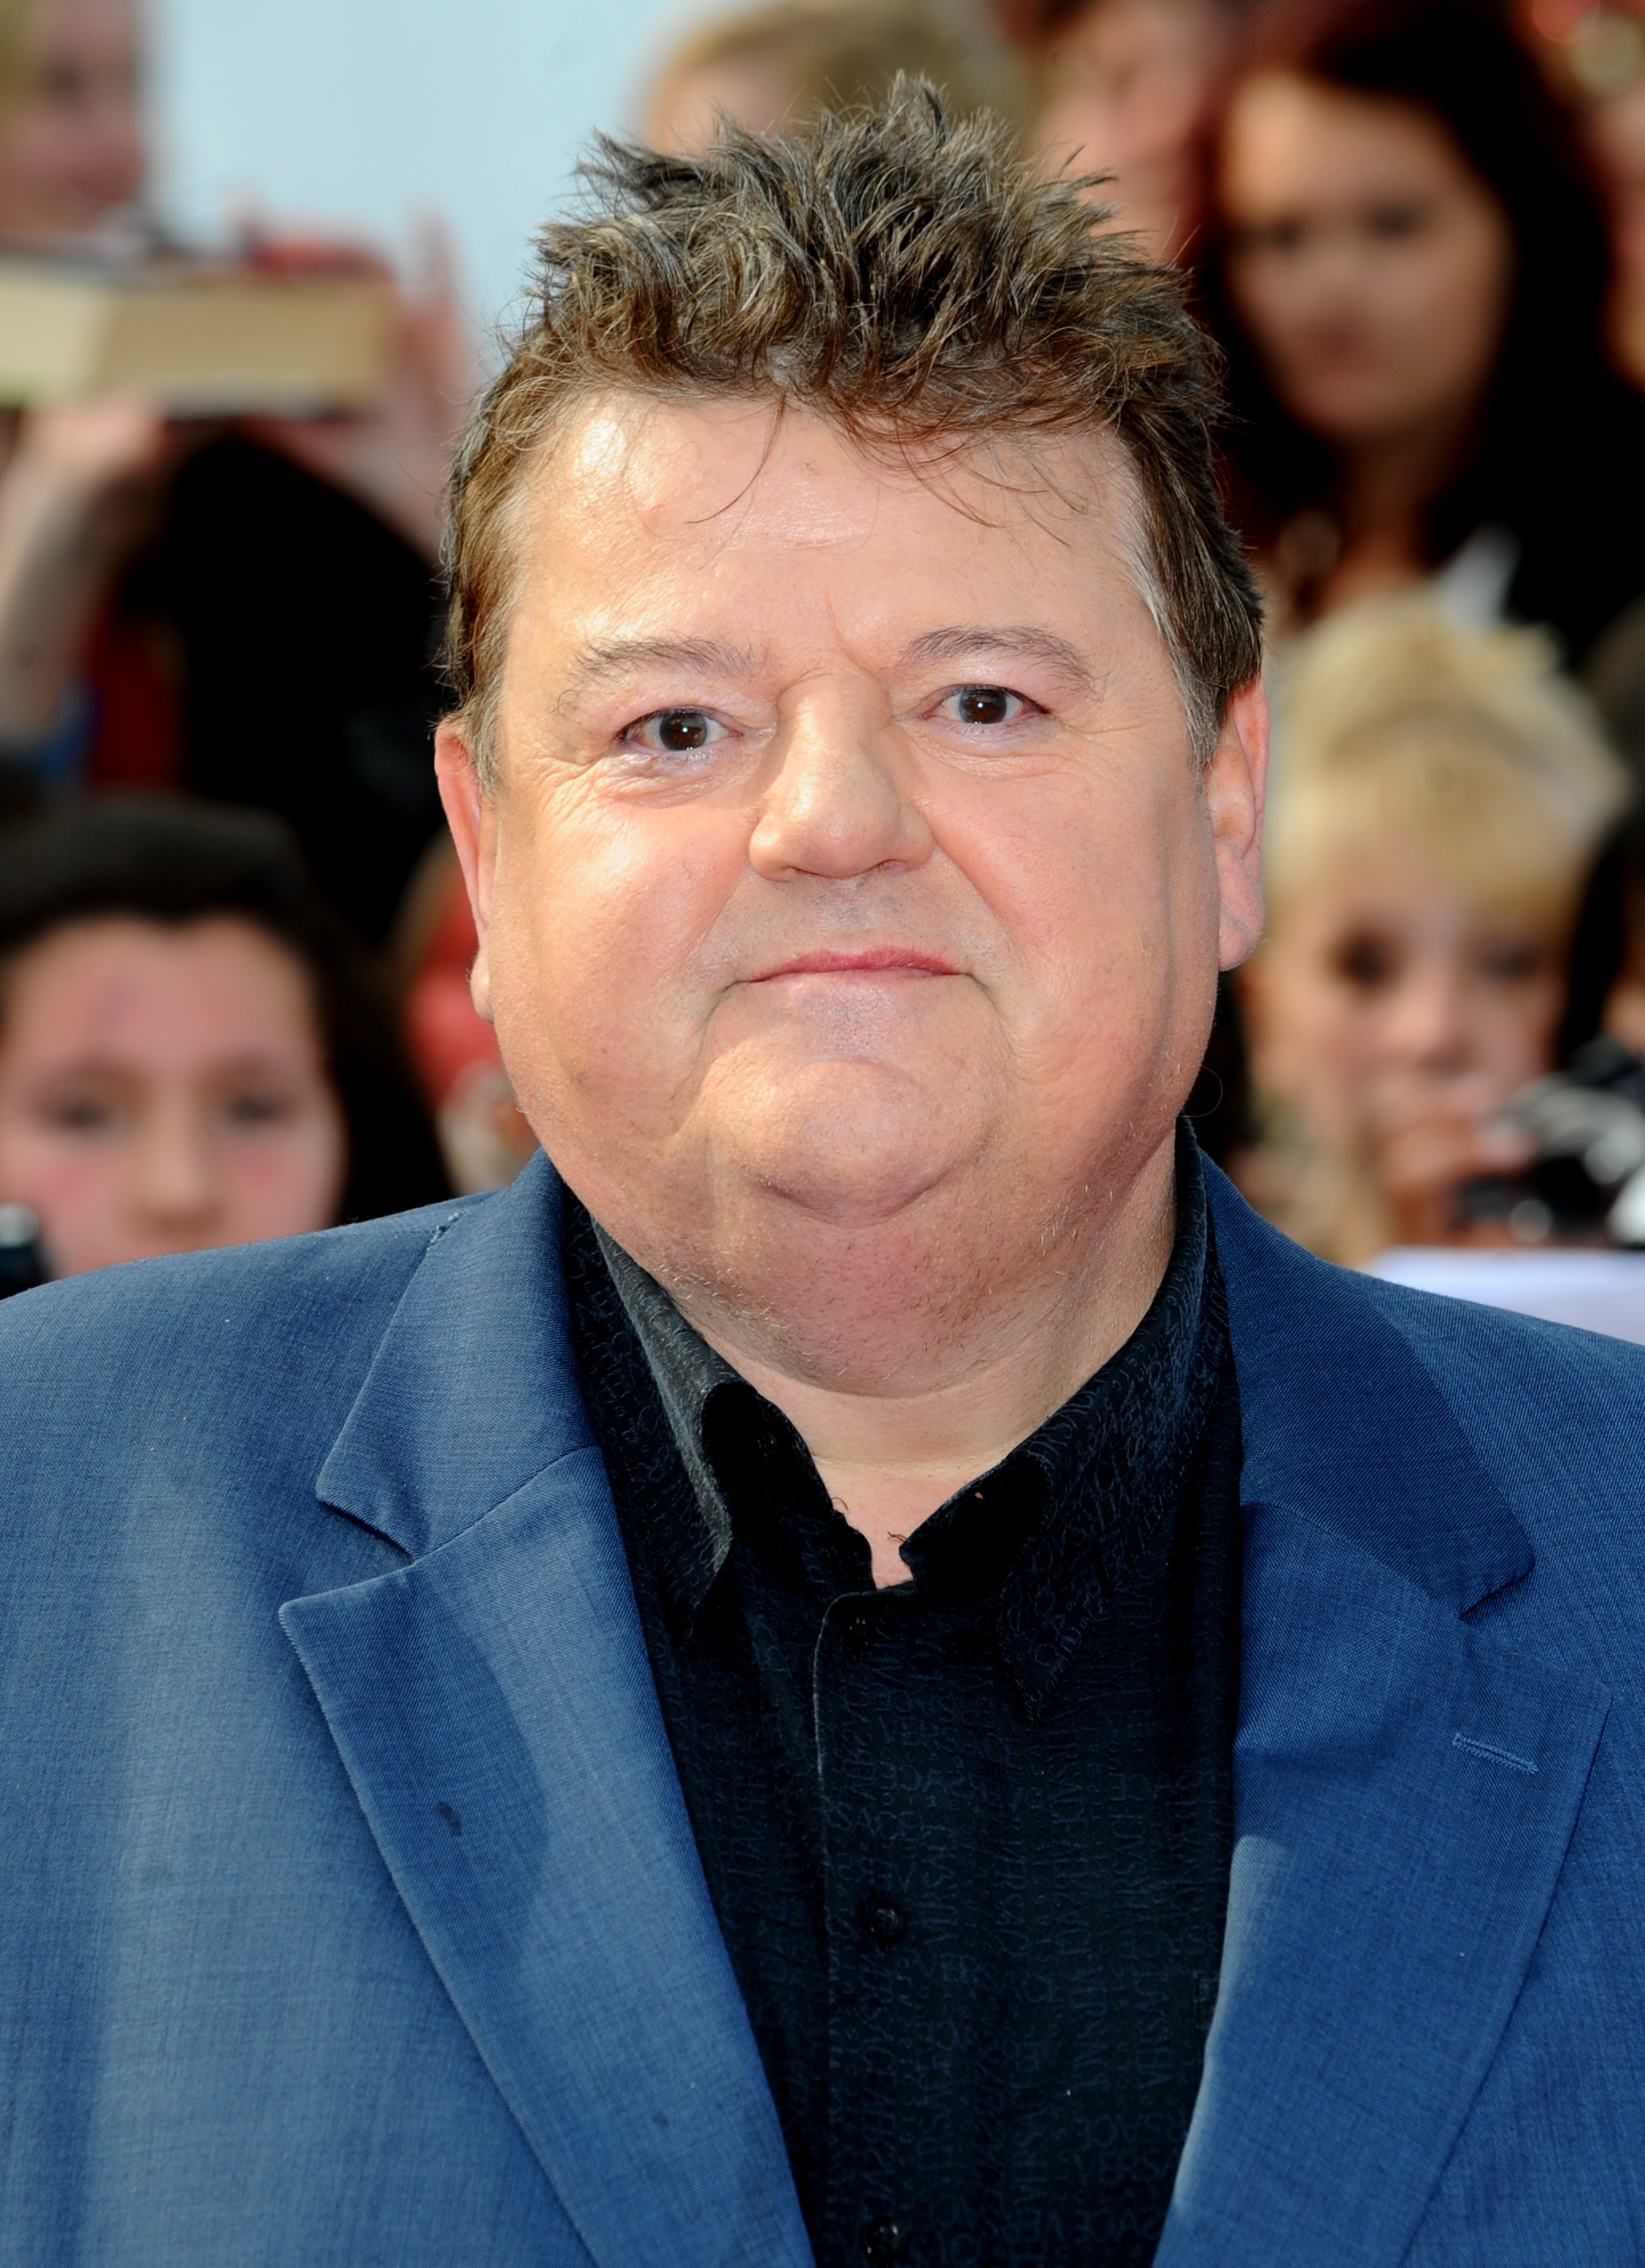 Robbie Coltrane attends Harry Potter and the Deathly Hallows: Part 2 London premiere in 2012